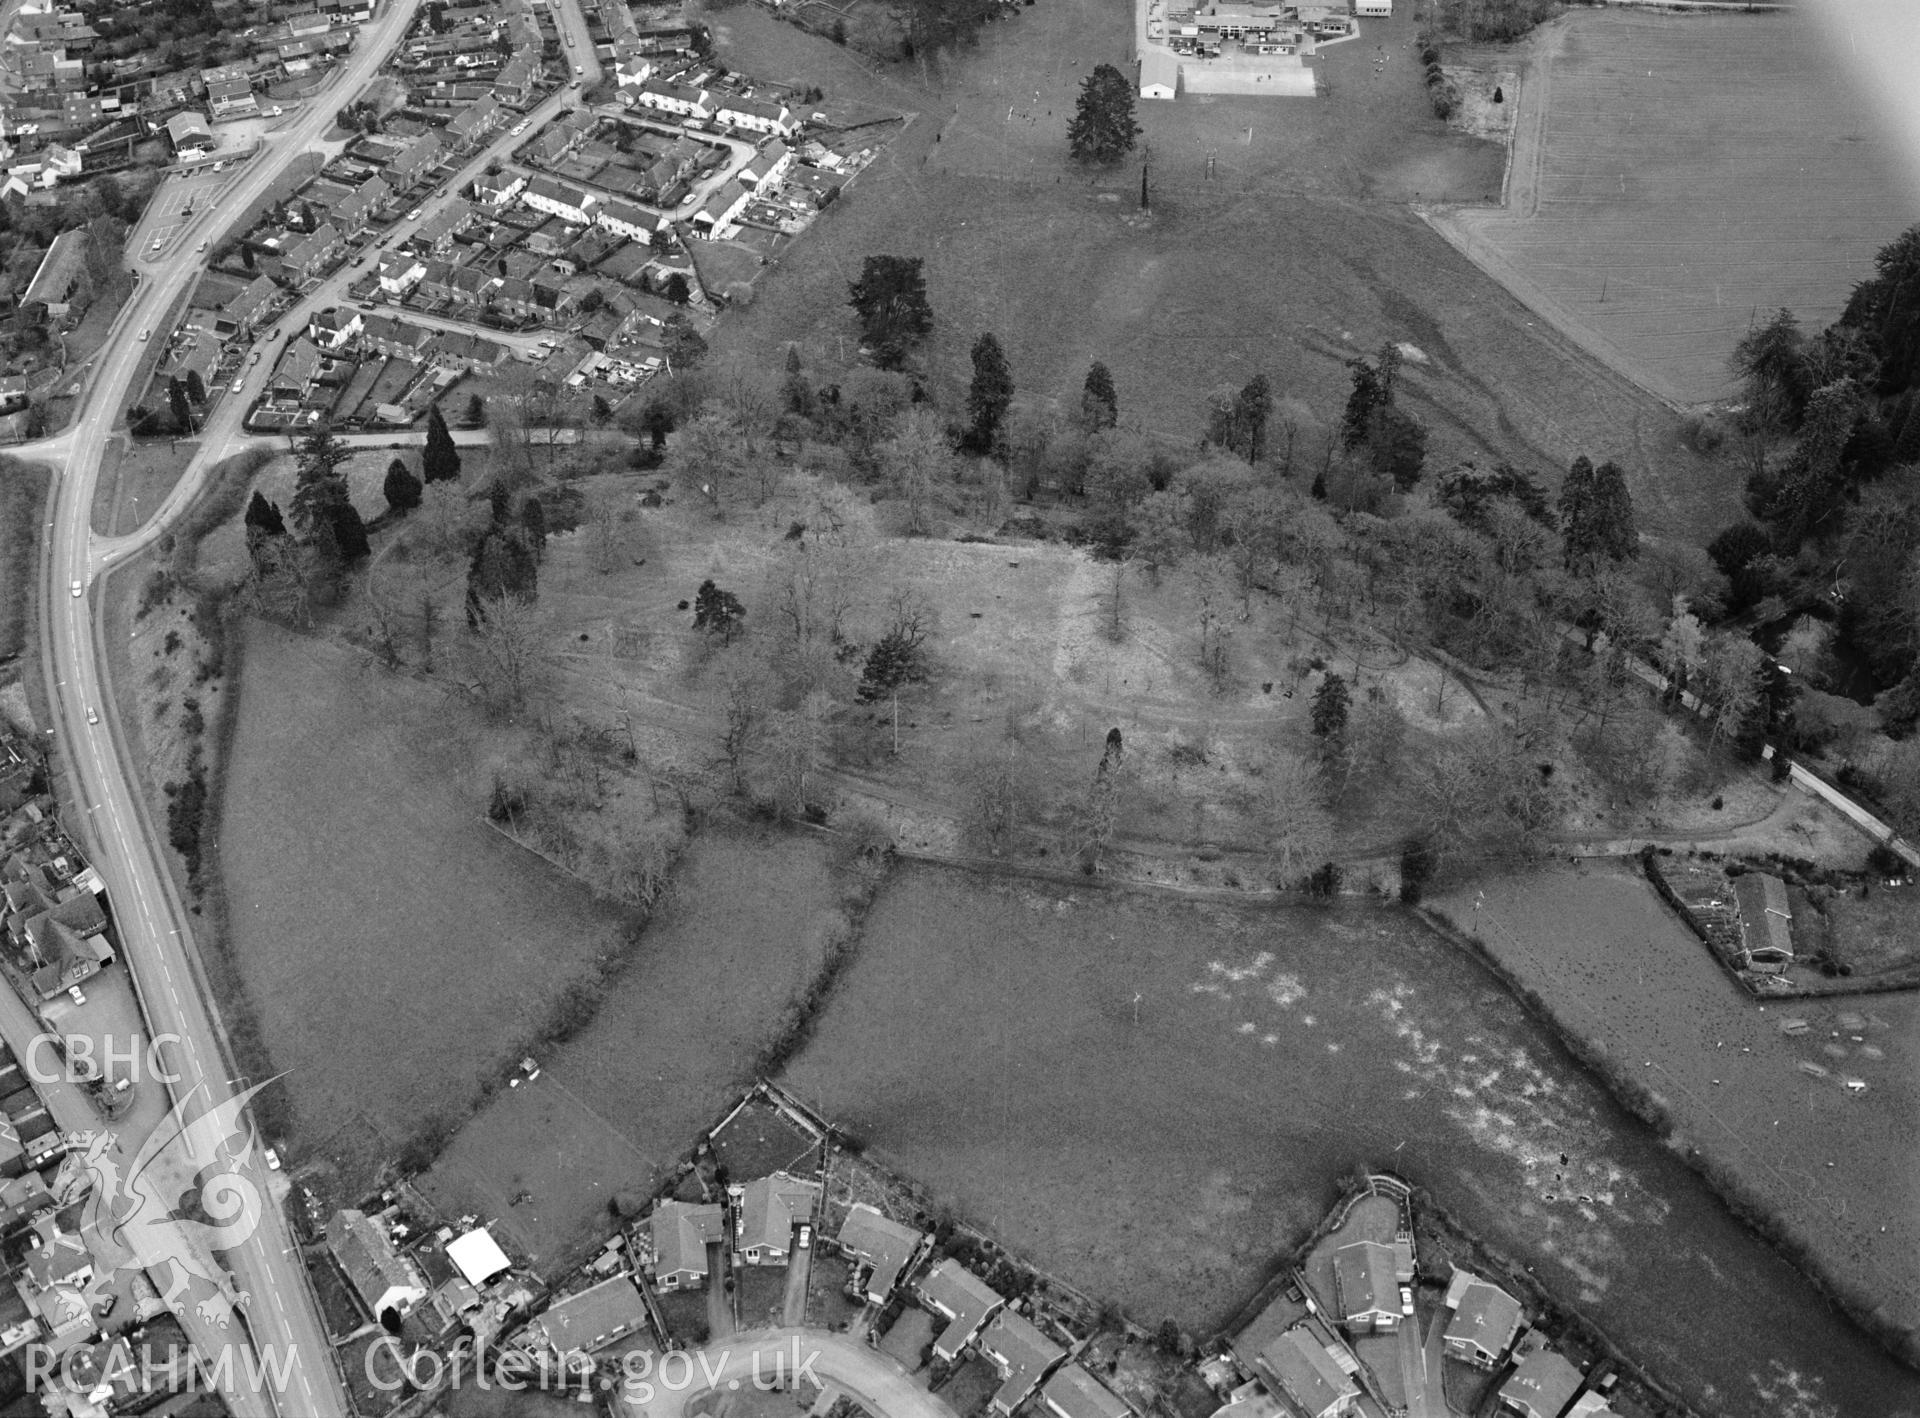 RCAHMW black and white aerial photograph of Warden Ring and Bailey. Taken by C R Musson on 21/03/1995